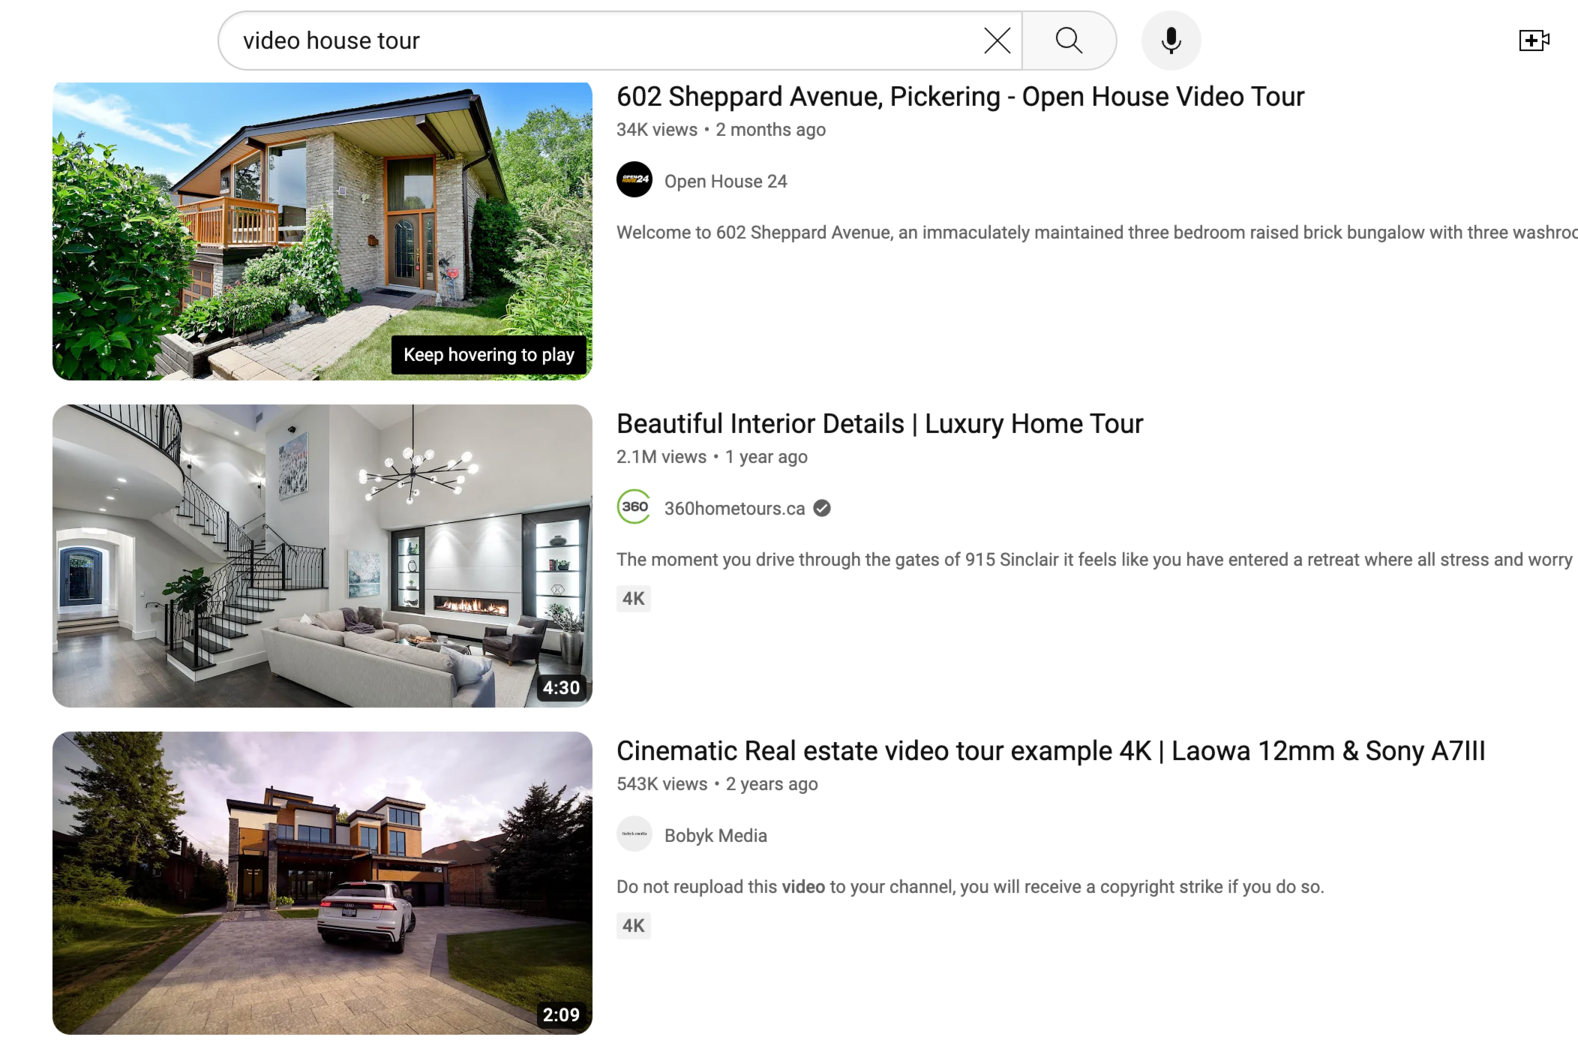 three examples of real estate video house tours on YouTube